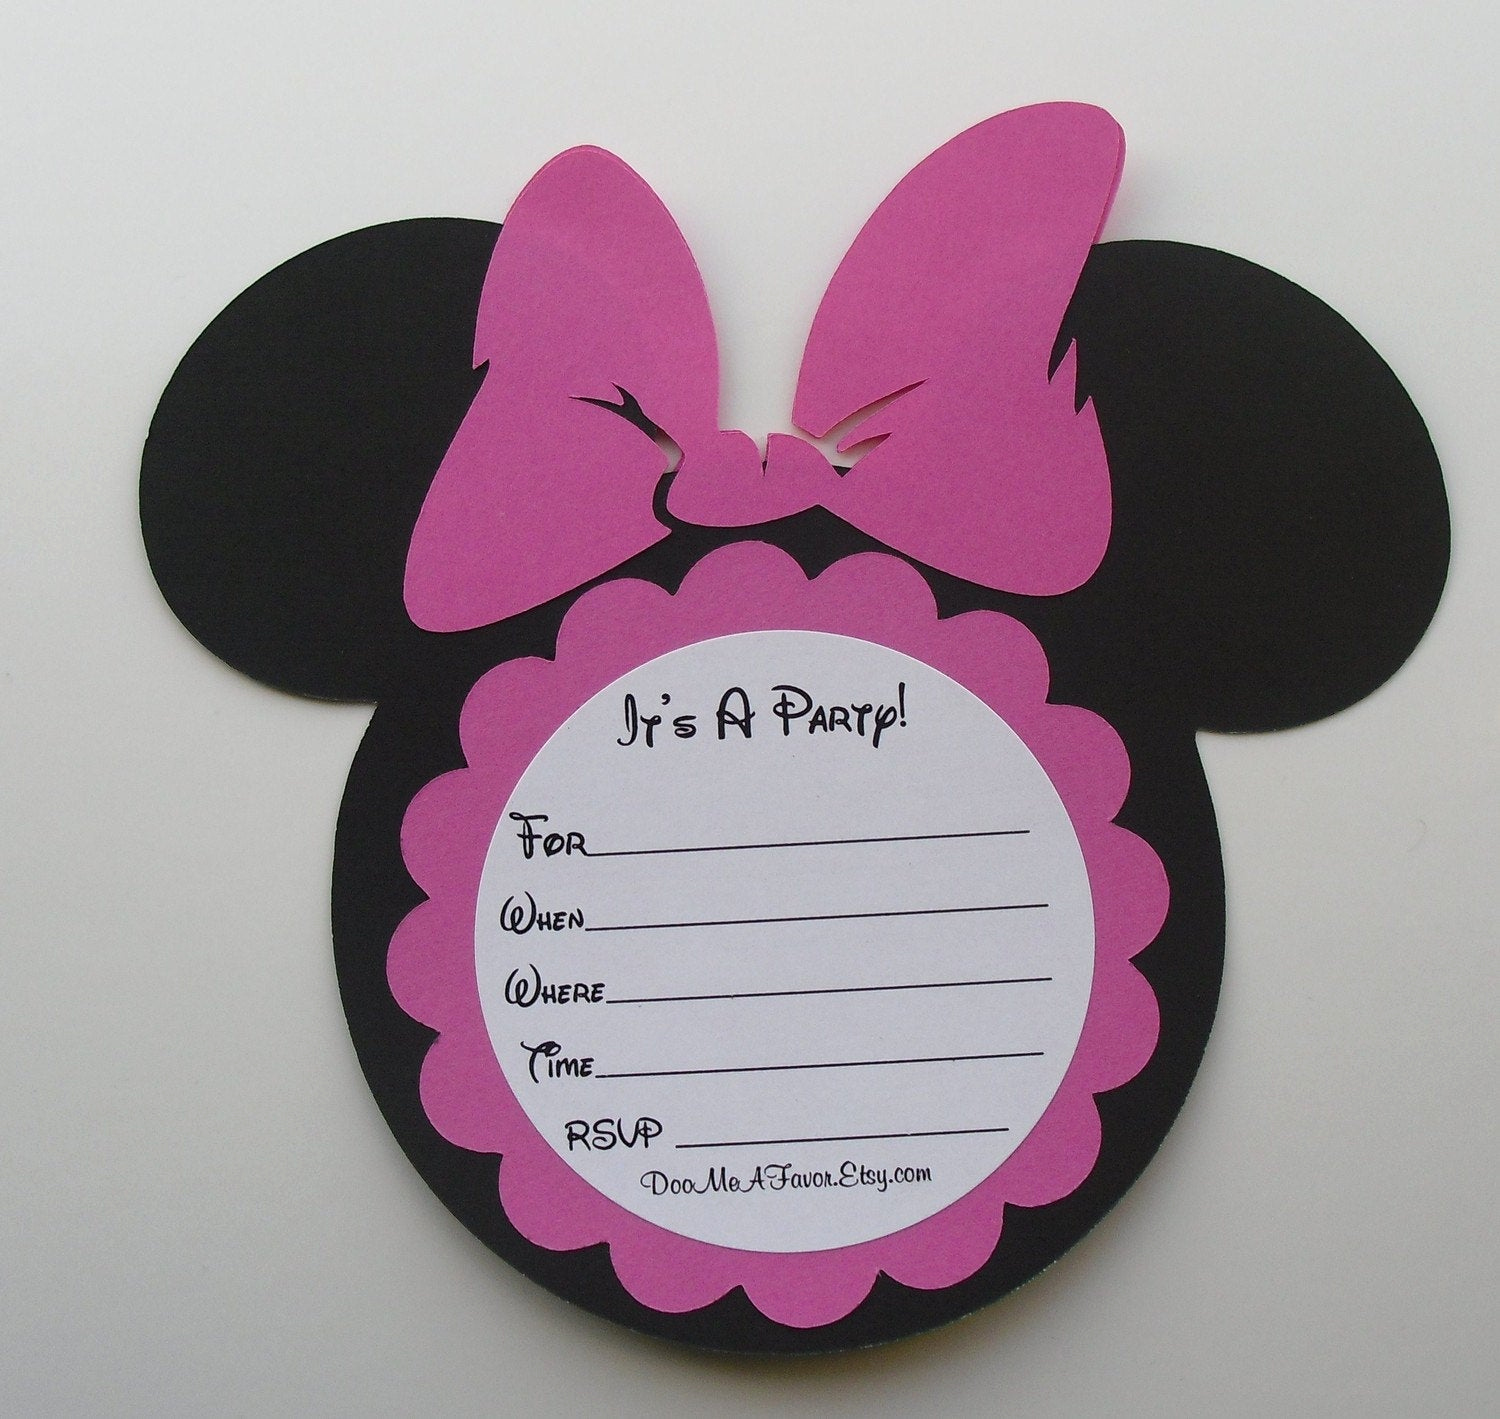 Minnie Mouse Invitation Template New Minnie Mouse Invitation Diy Kit by Doomeafavor On Etsy